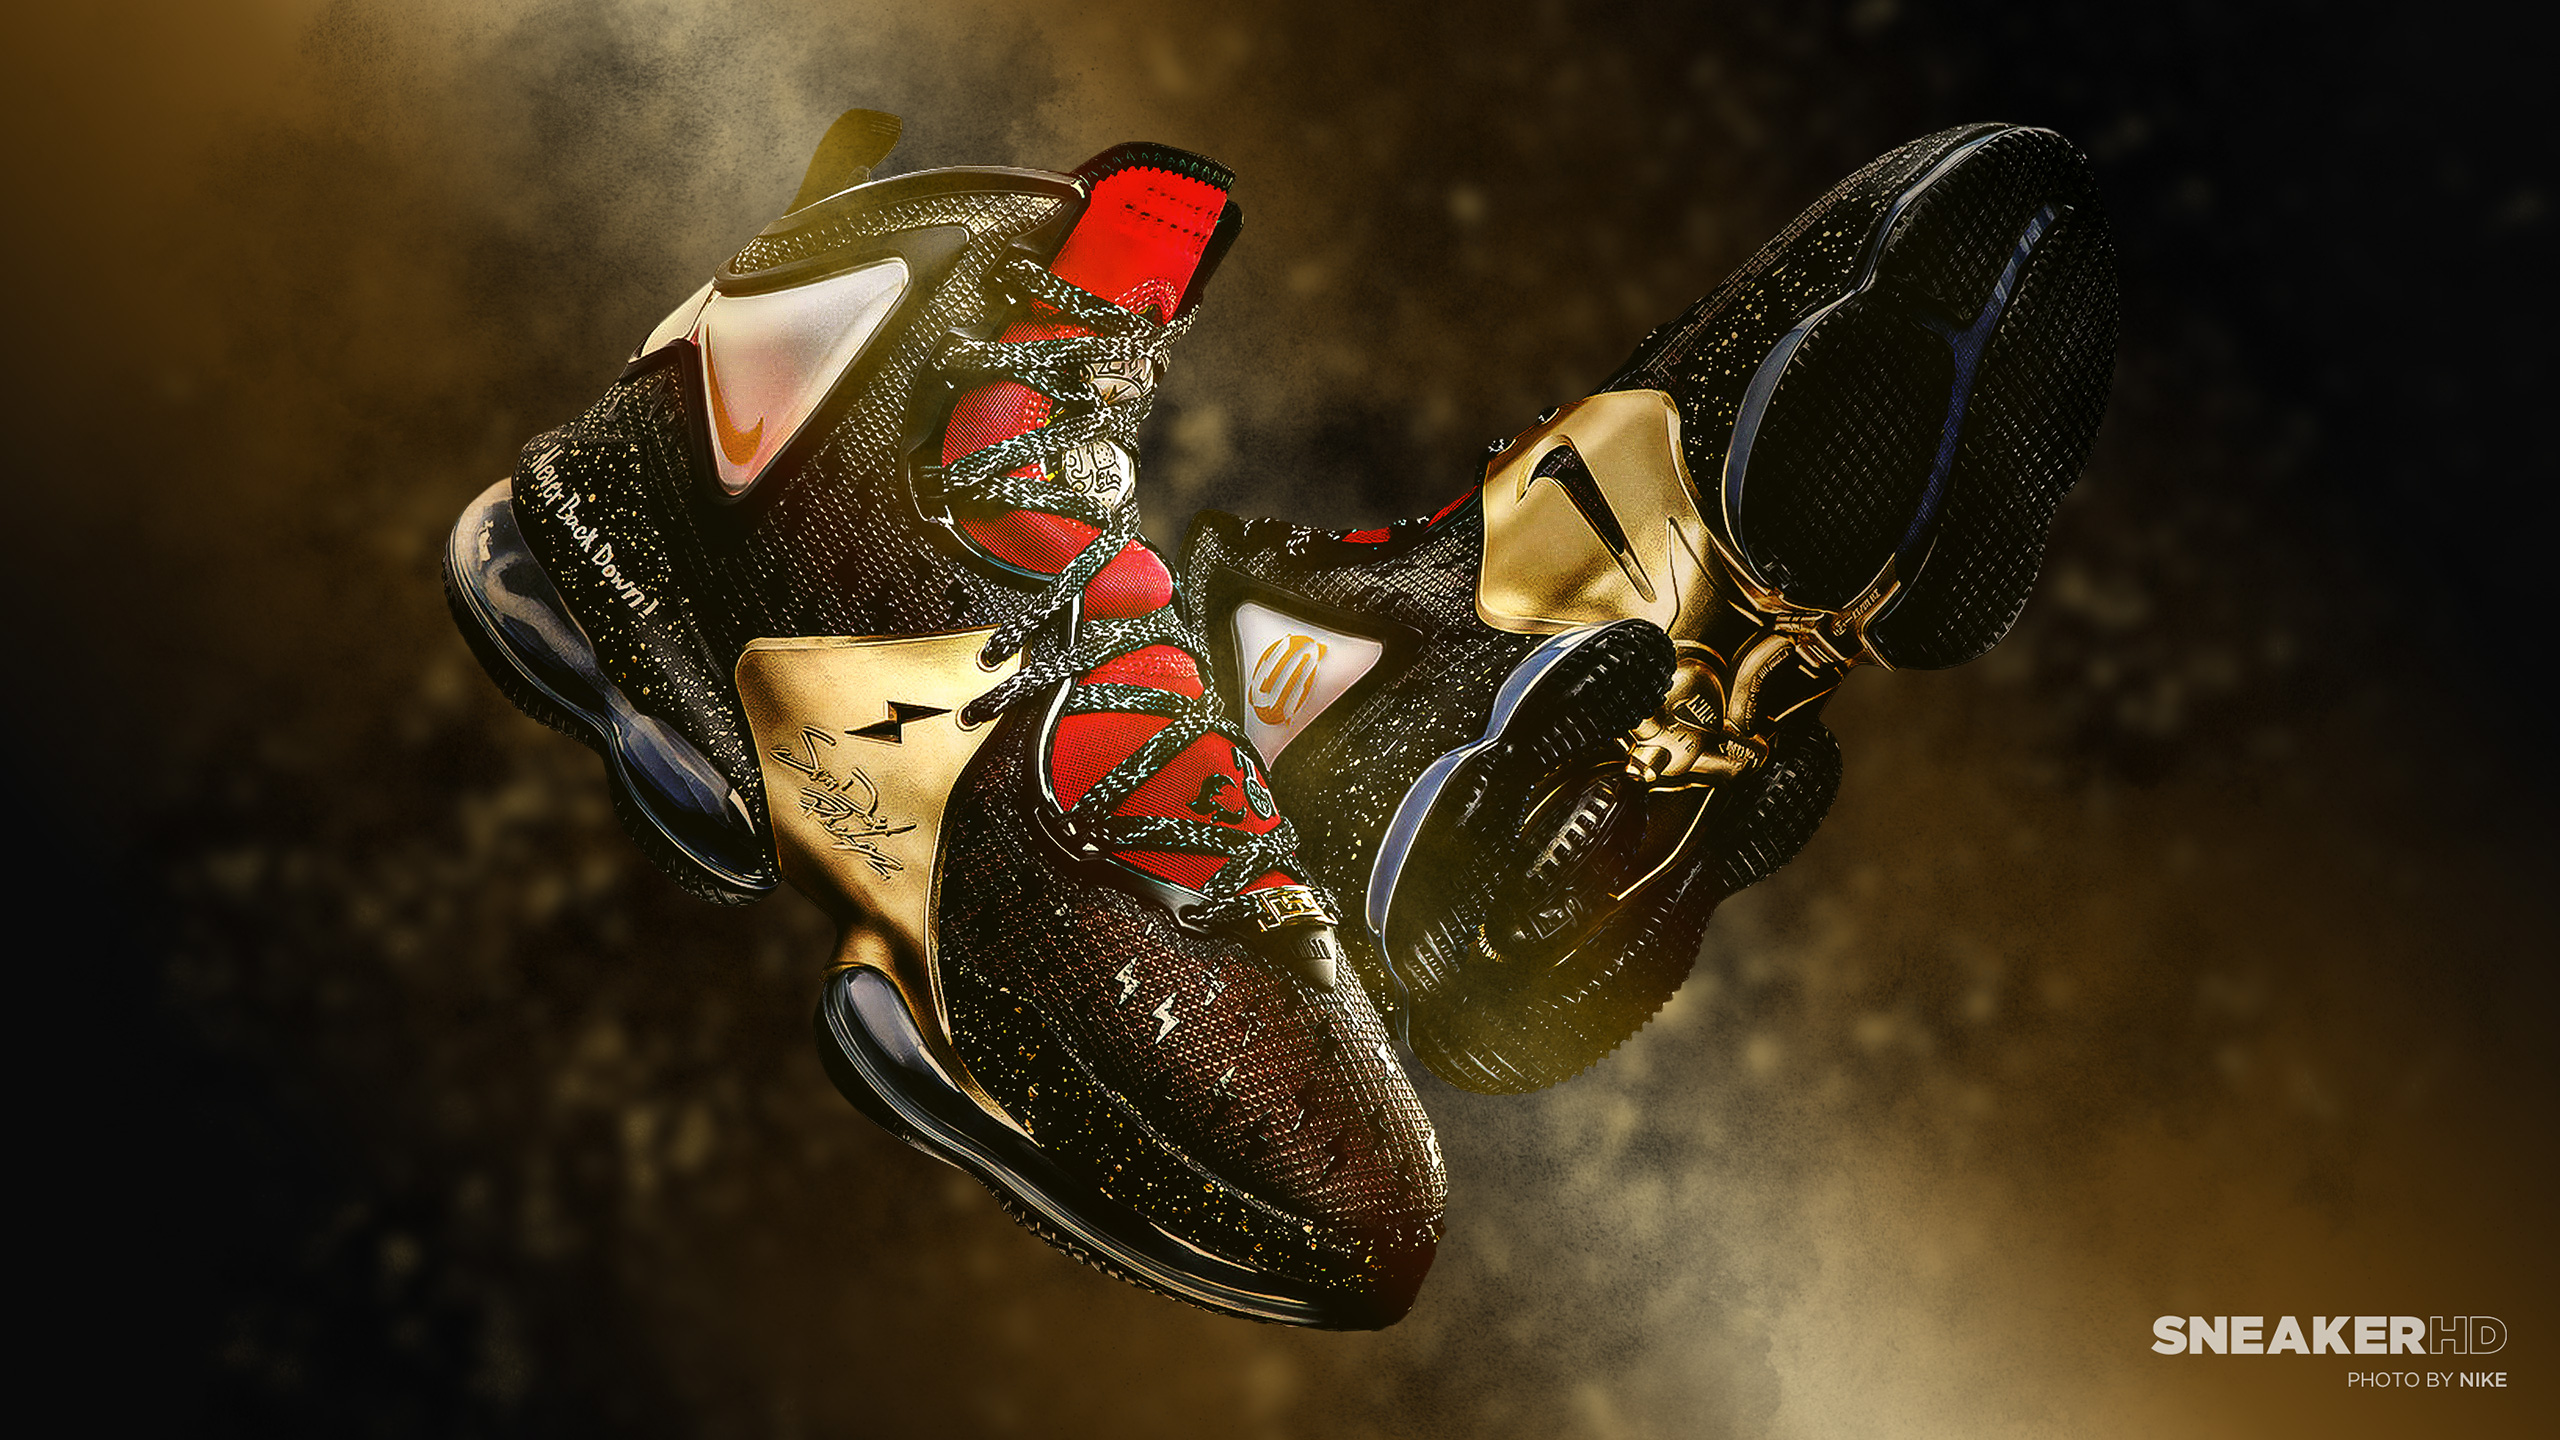  – Your favorite sneakers in 4K, Retina, Mobile and  HD wallpaper resolutions! » Blog Archive NEW LeBron 19 Doernbecher wallpaper!   - Your favorite sneakers in 4K, Retina, Mobile and